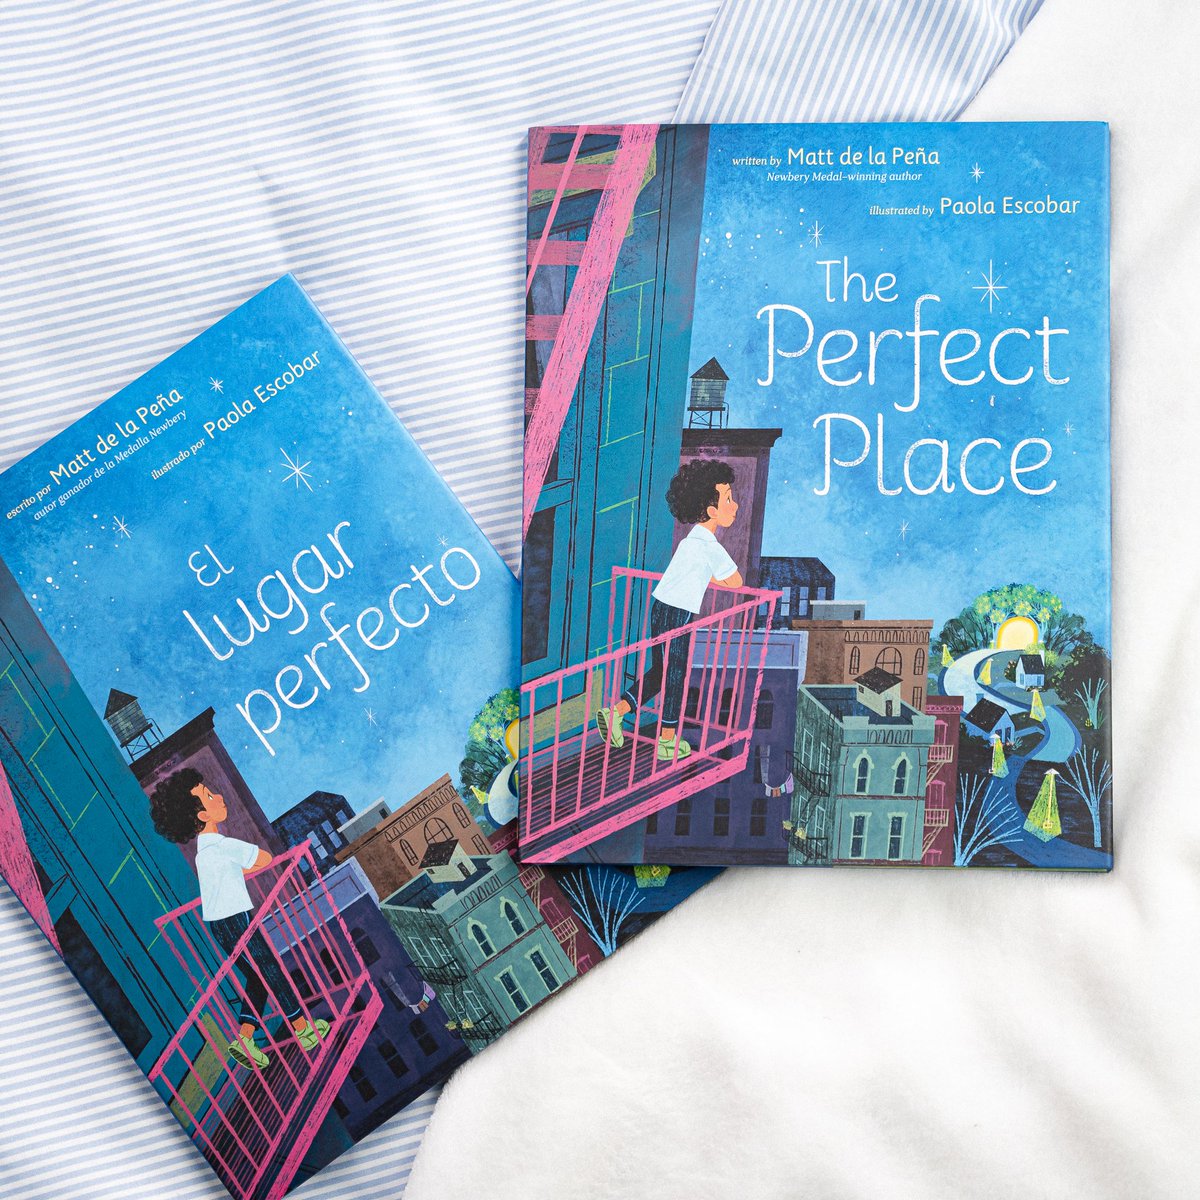 Today is pub day for THE PERFECT PLACE! Available in both English and Spanish! Hope you all will give it a shot!